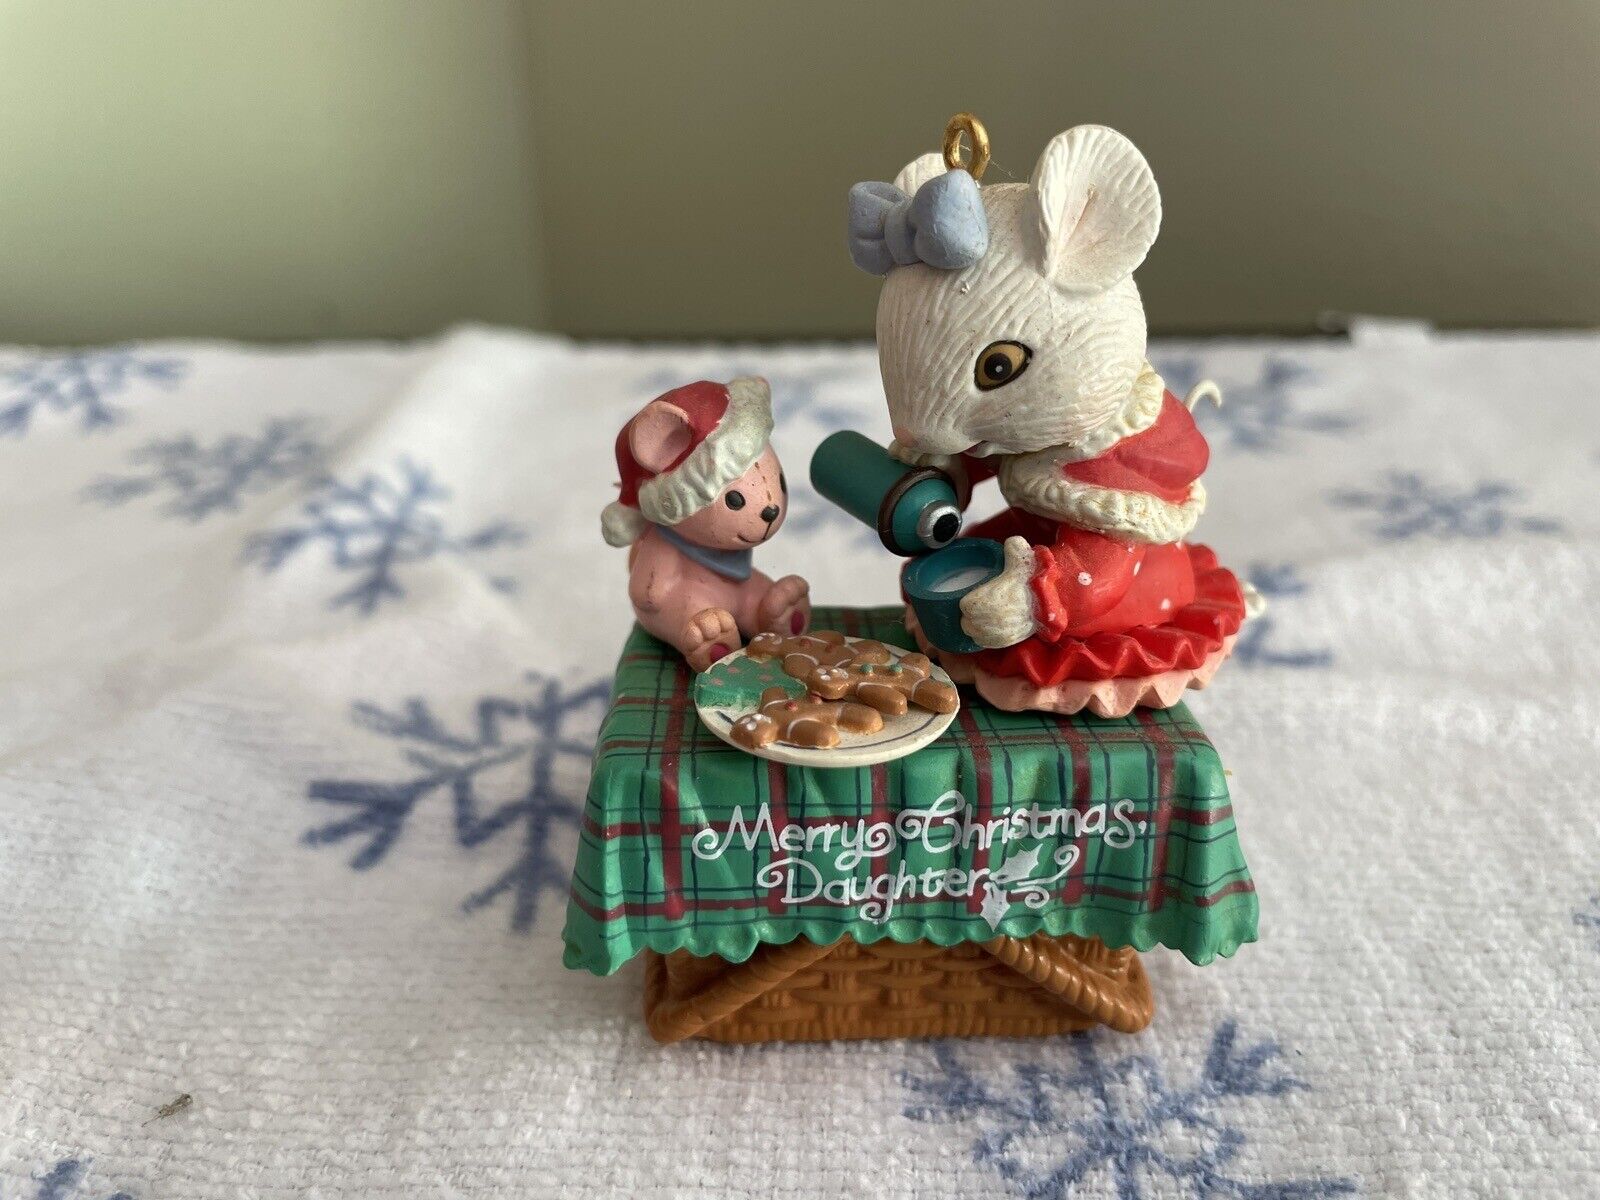 1993 Enesco Treasury Ornament Merry Christmas Daughter Mouse Gingerbread Cookies